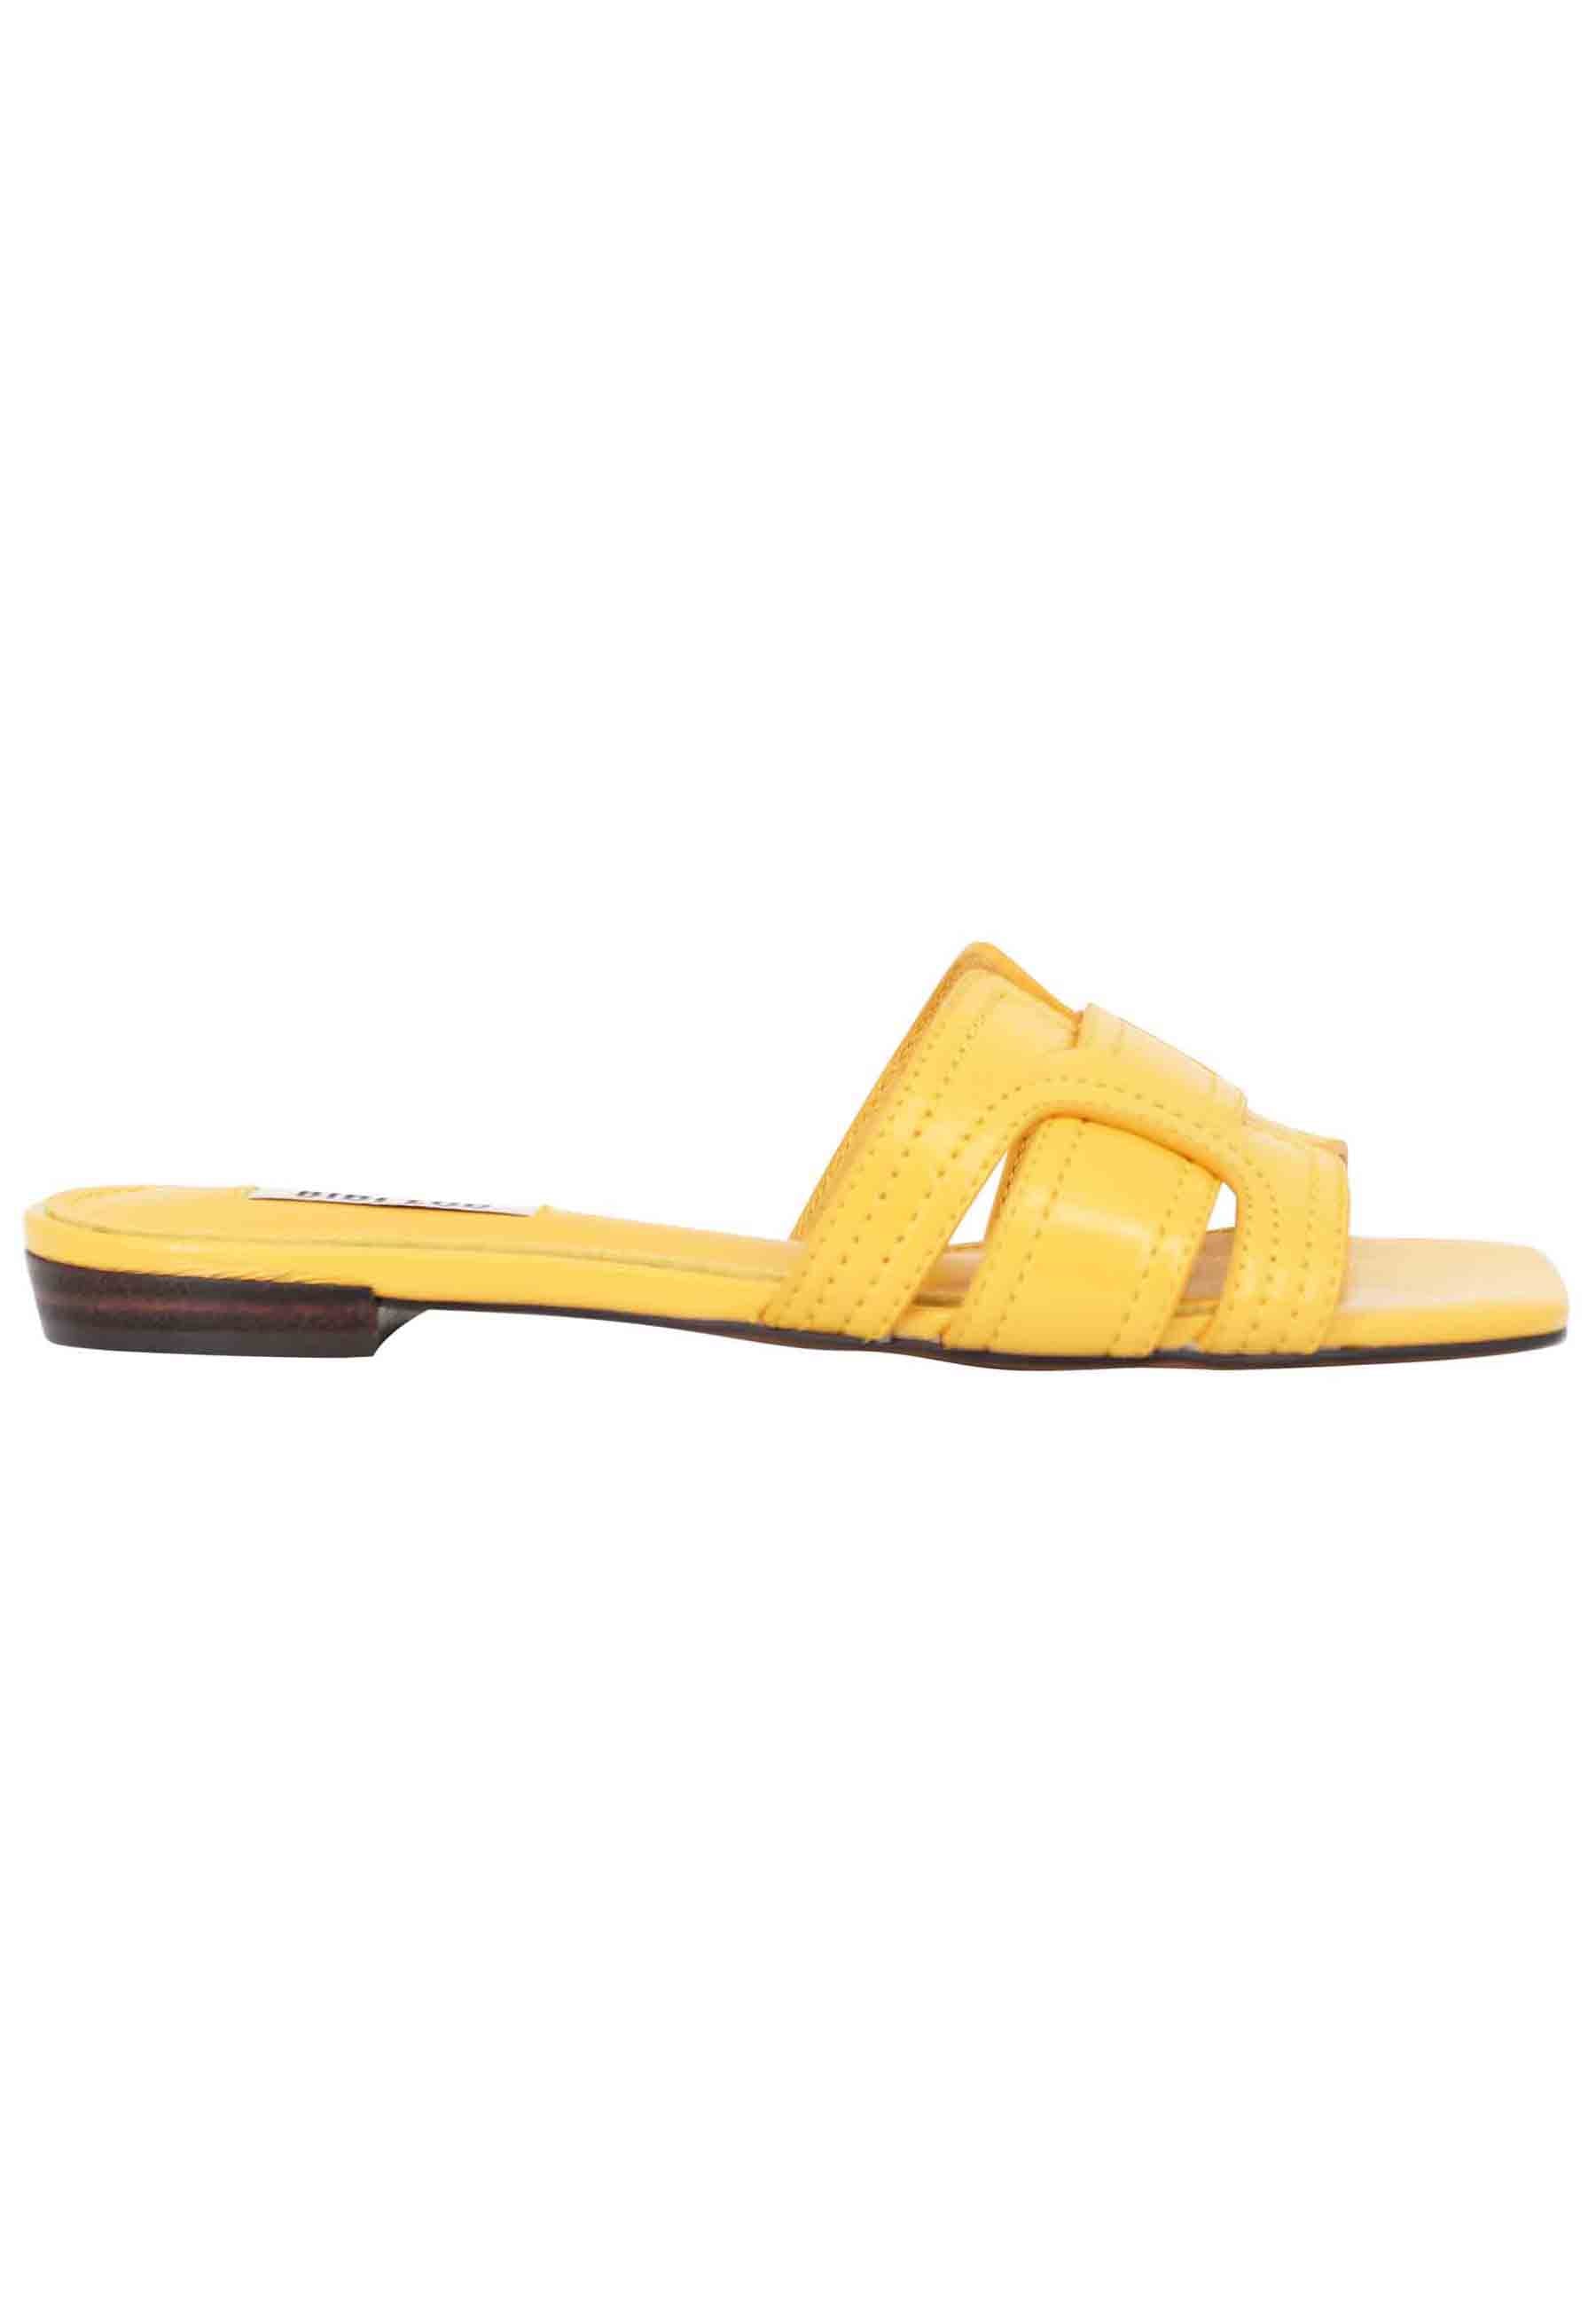 Cremes women's flat sandals in mustard leather and square toe